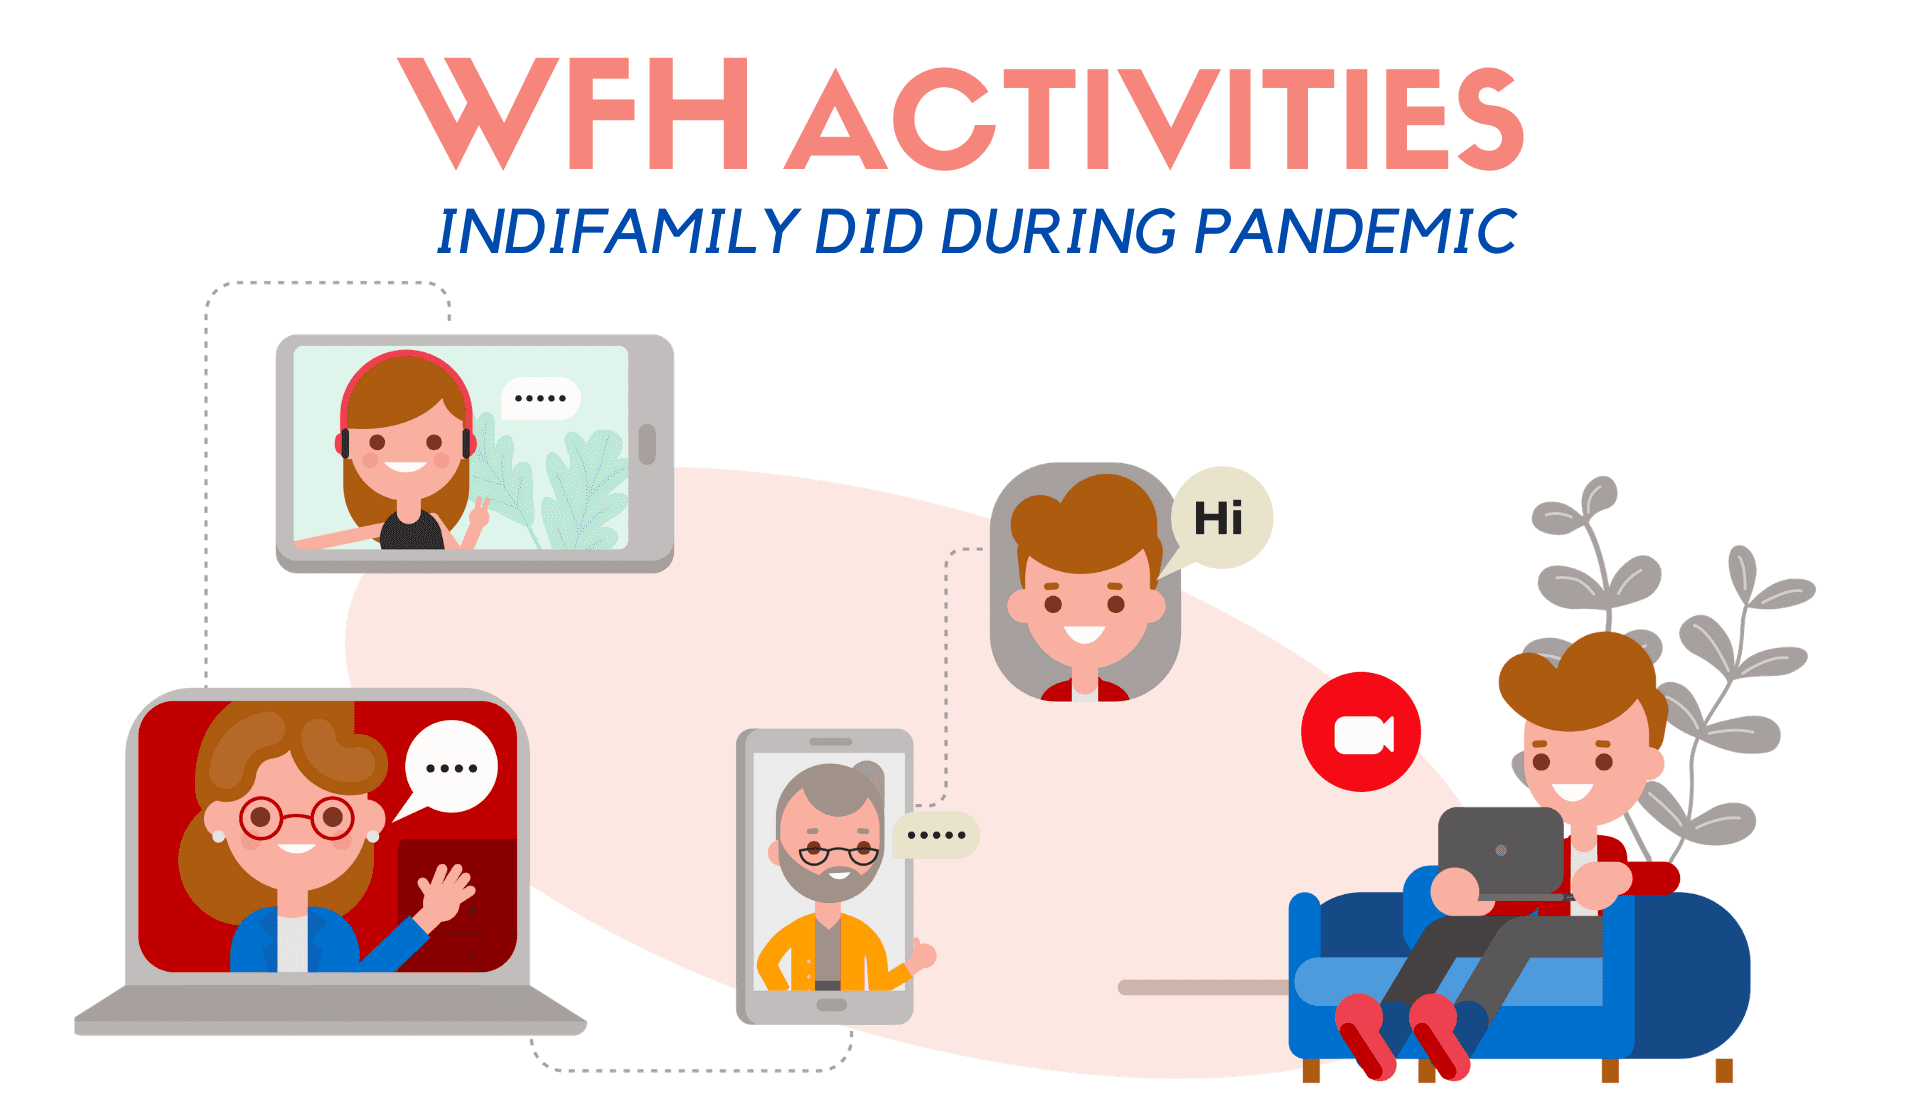 7+ Activities that Indifamily did during lockdown to make WORK FROM HOME Interesting.